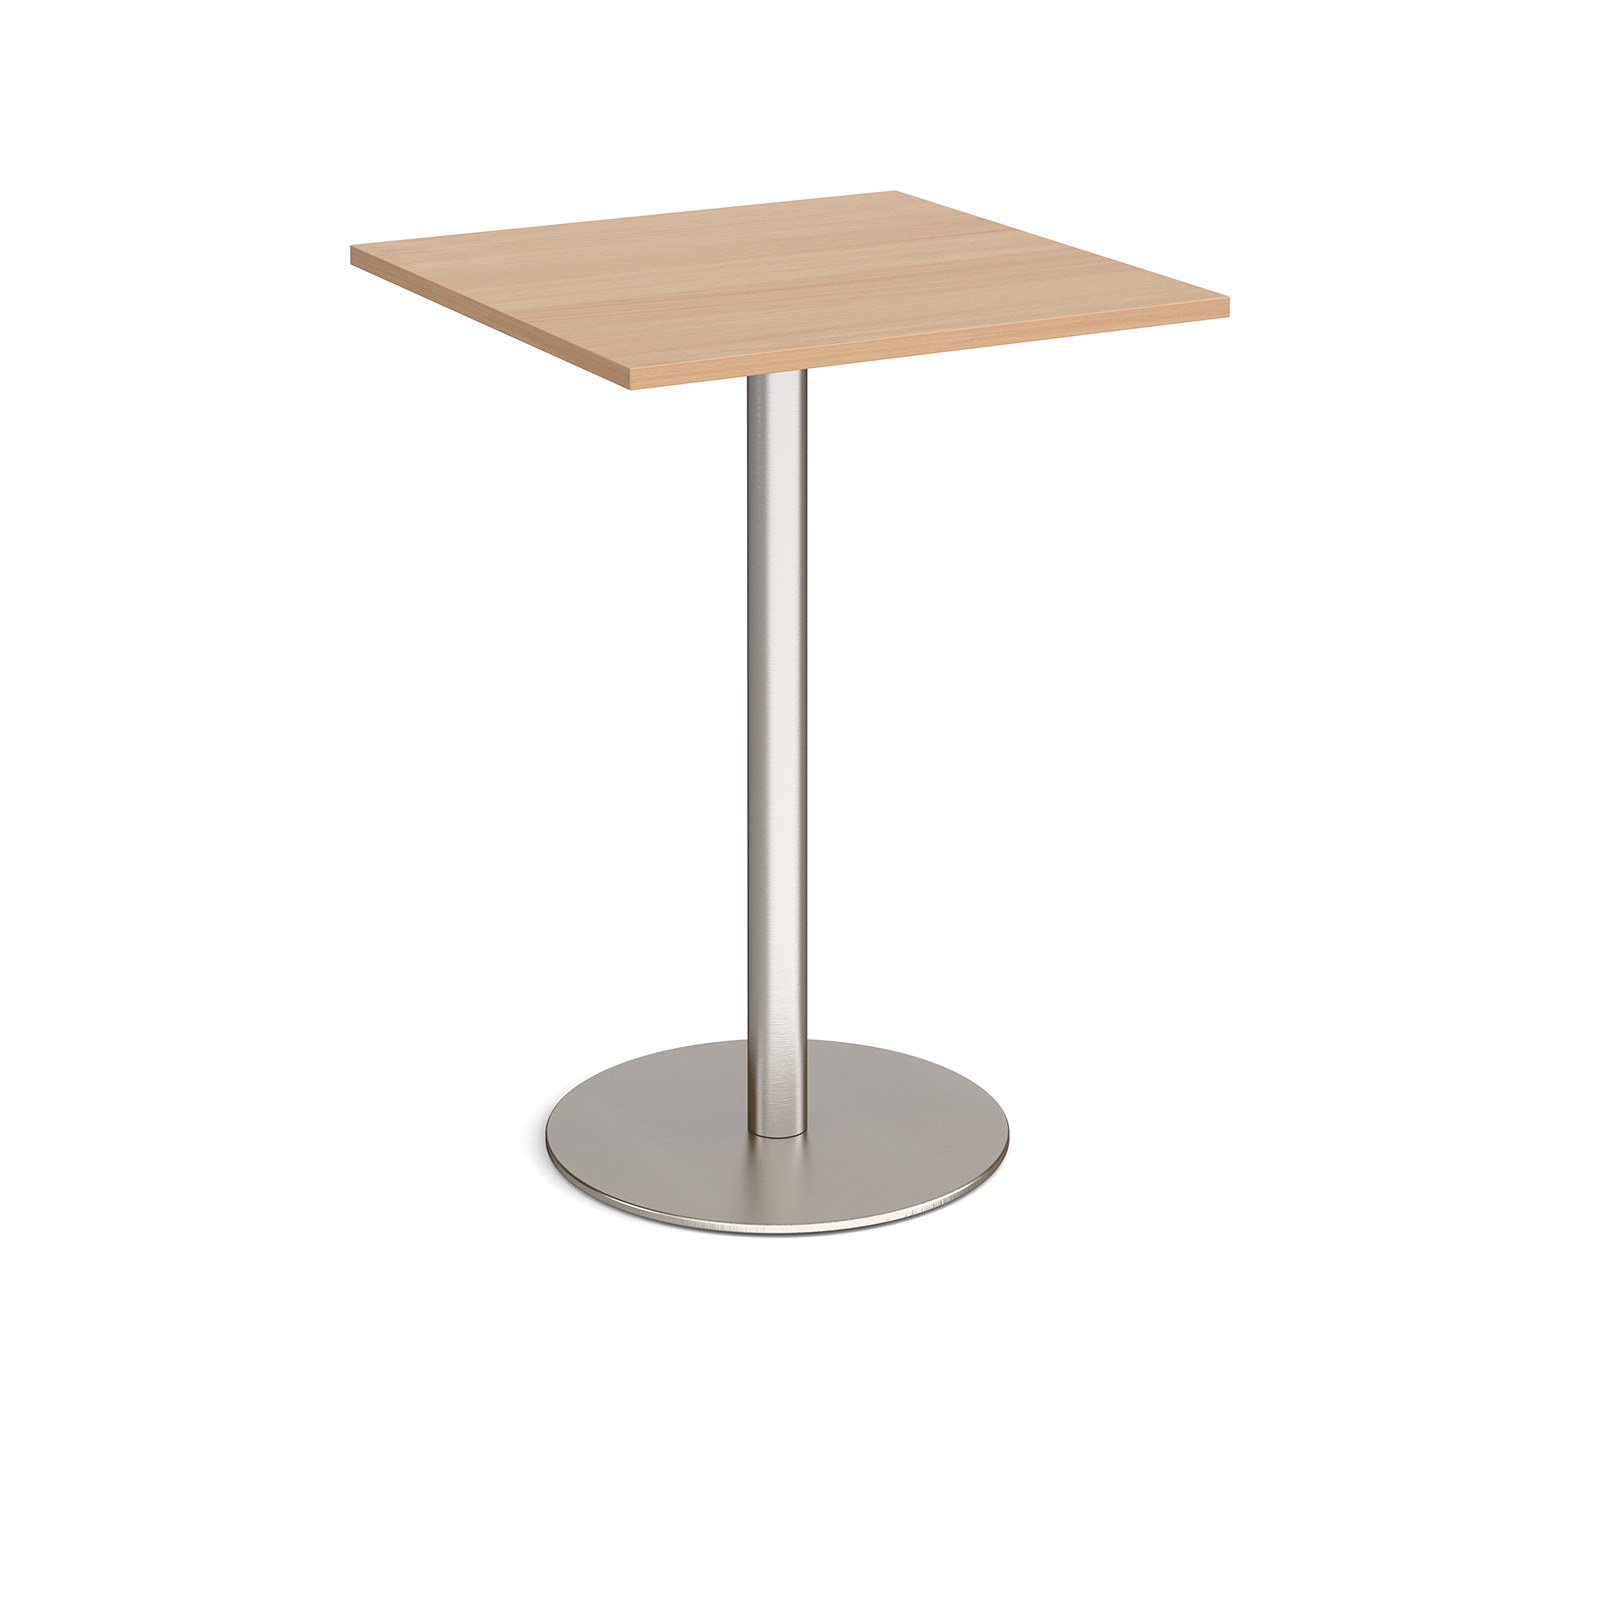 Monza square poseur table with flat round brushed steel base 800mm - beech